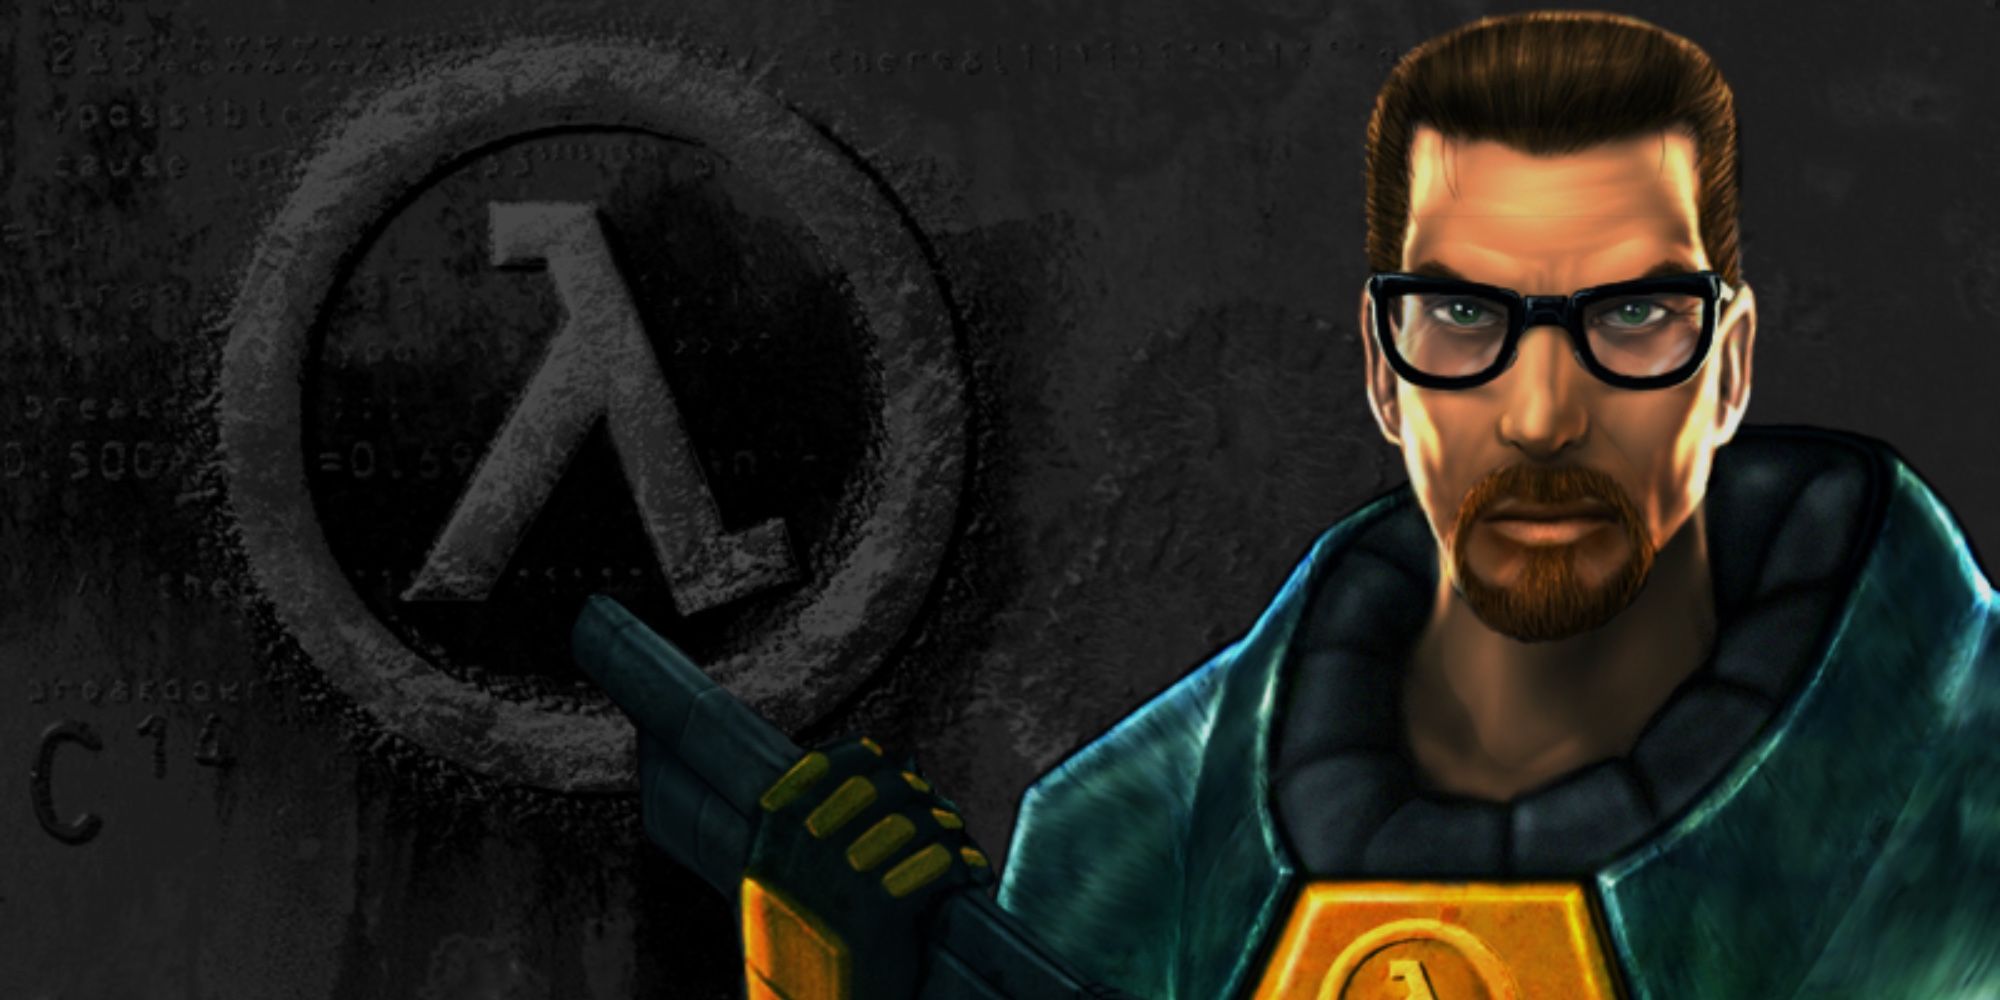 Perfect Gaming Characters - Gordon Freeman - Iconic look of the protagonist from Half-life